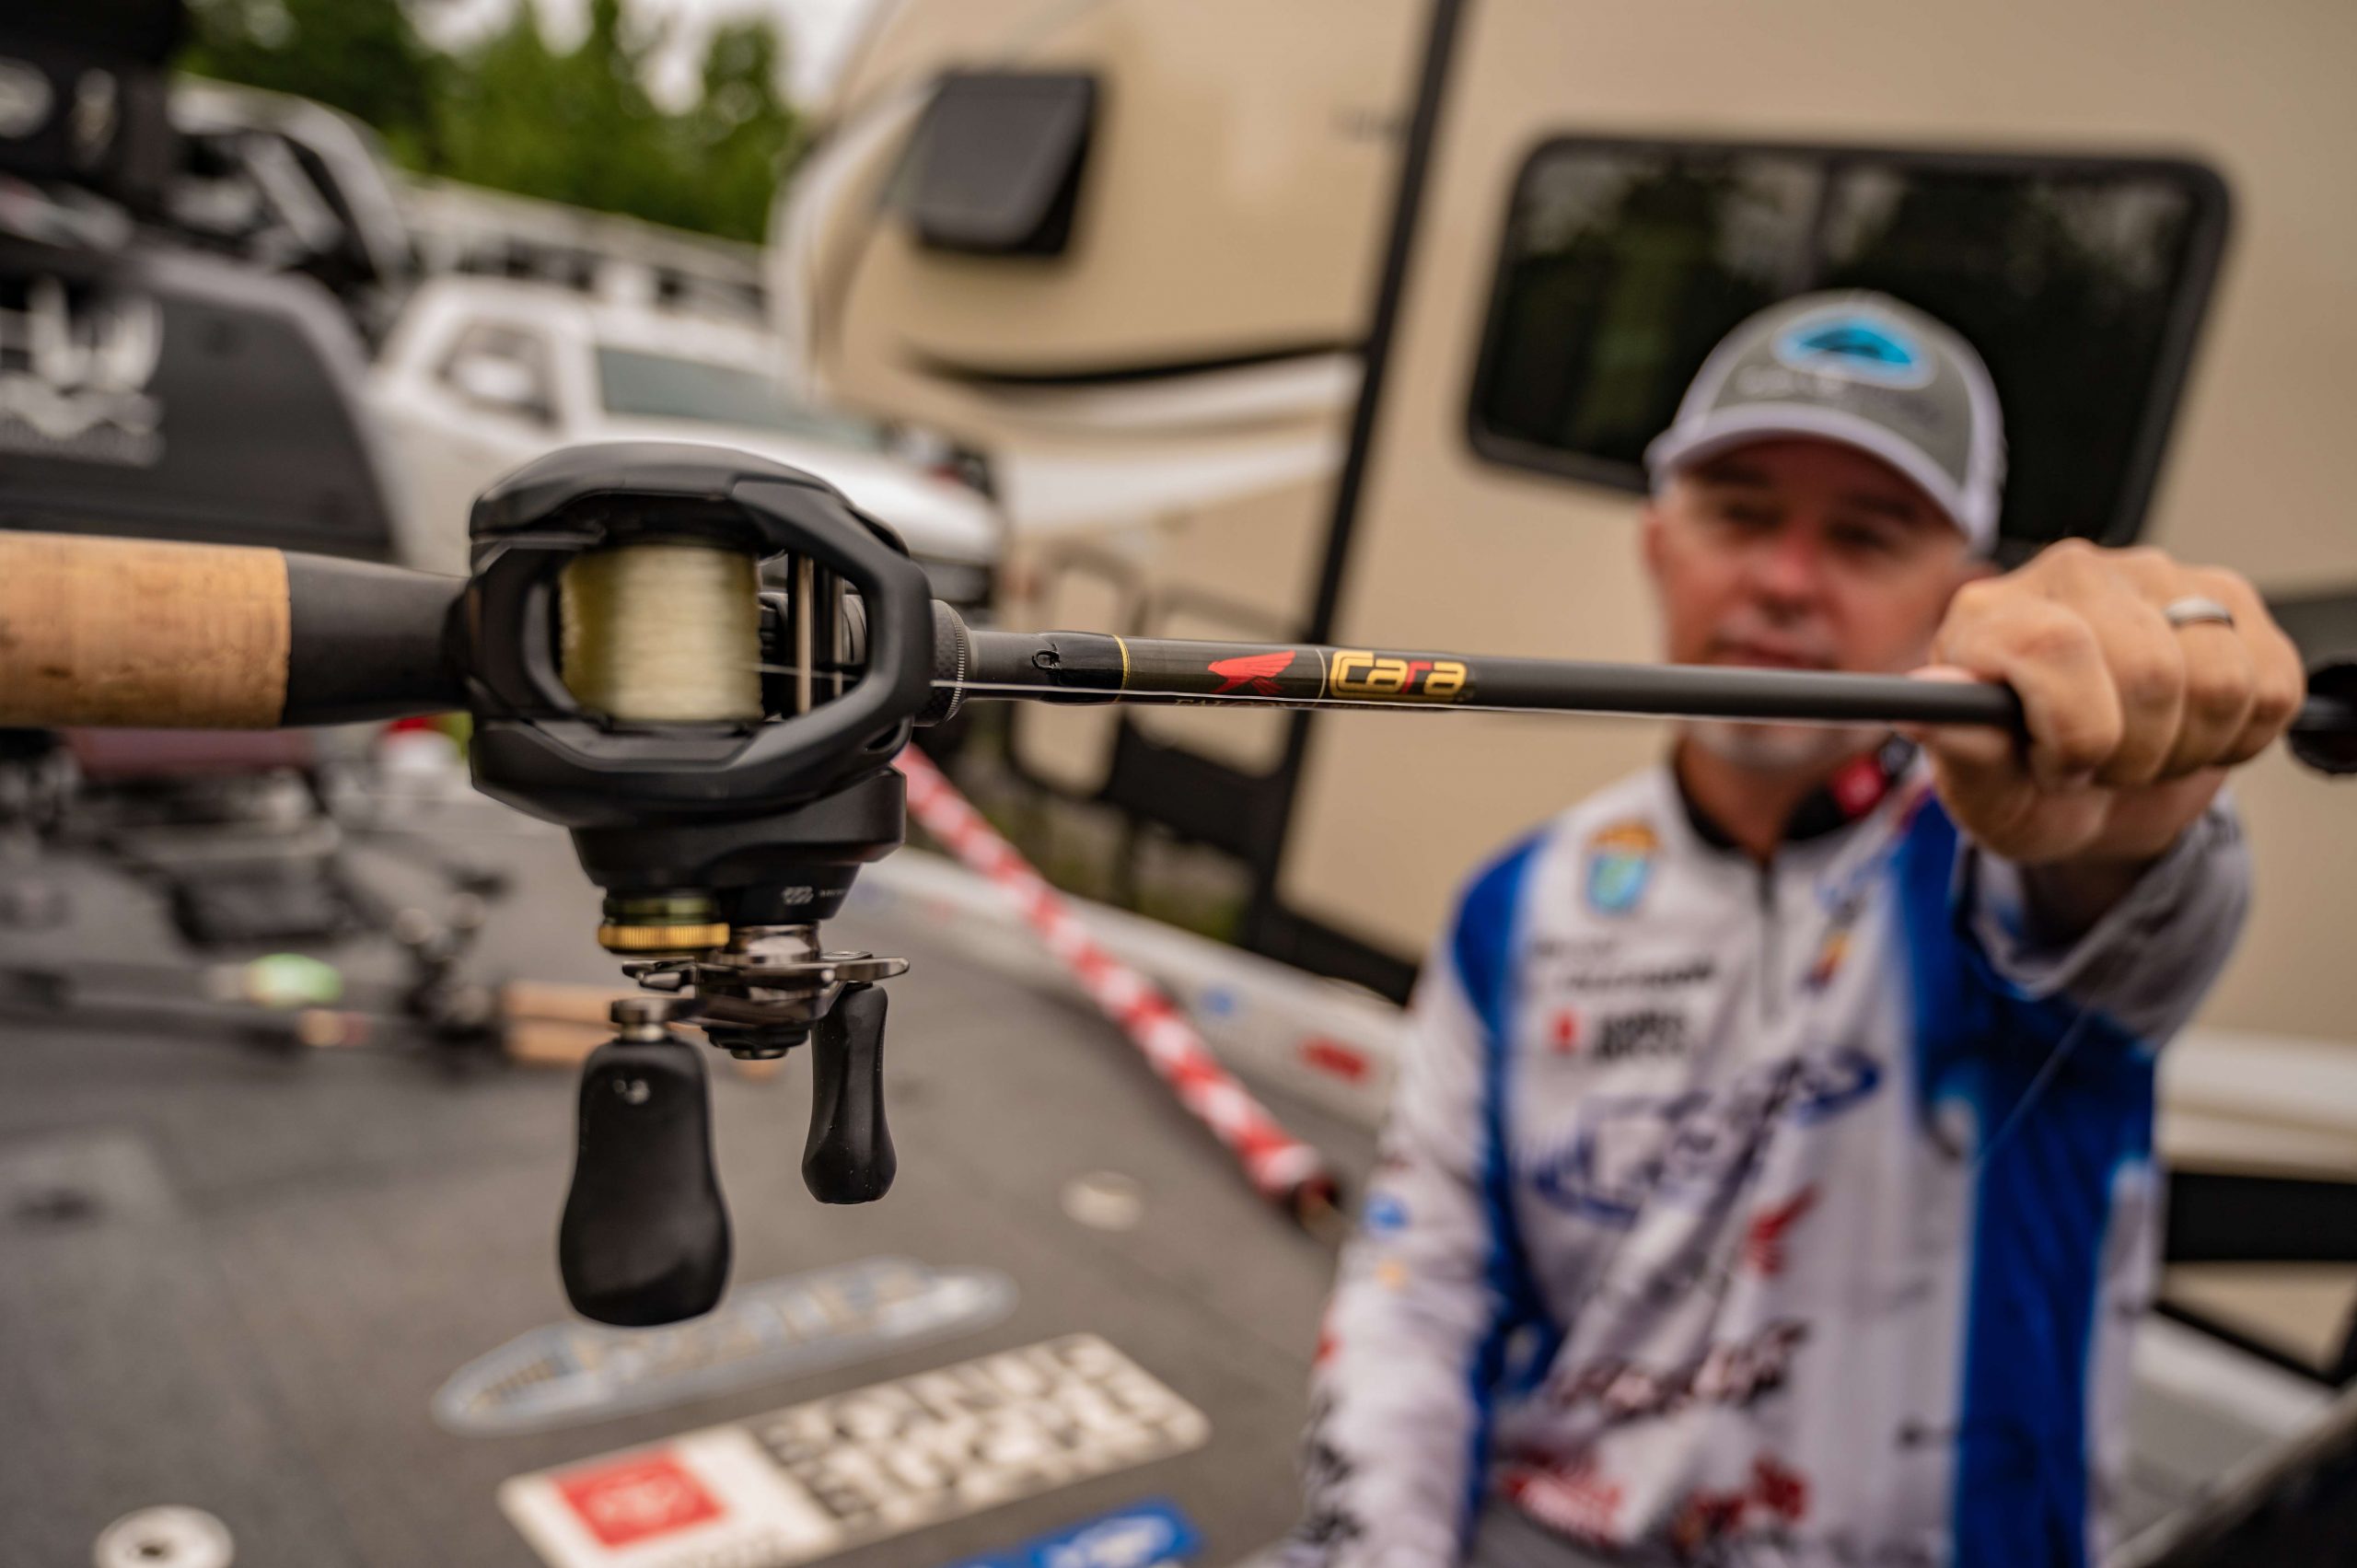 To toss his Carolina rig around, Gleason reaches for a Falcon Cara, 8-foot Super Duty rod. The long rod gives him the ability to move a lot of line with one sweep which is key when fishing offshore.